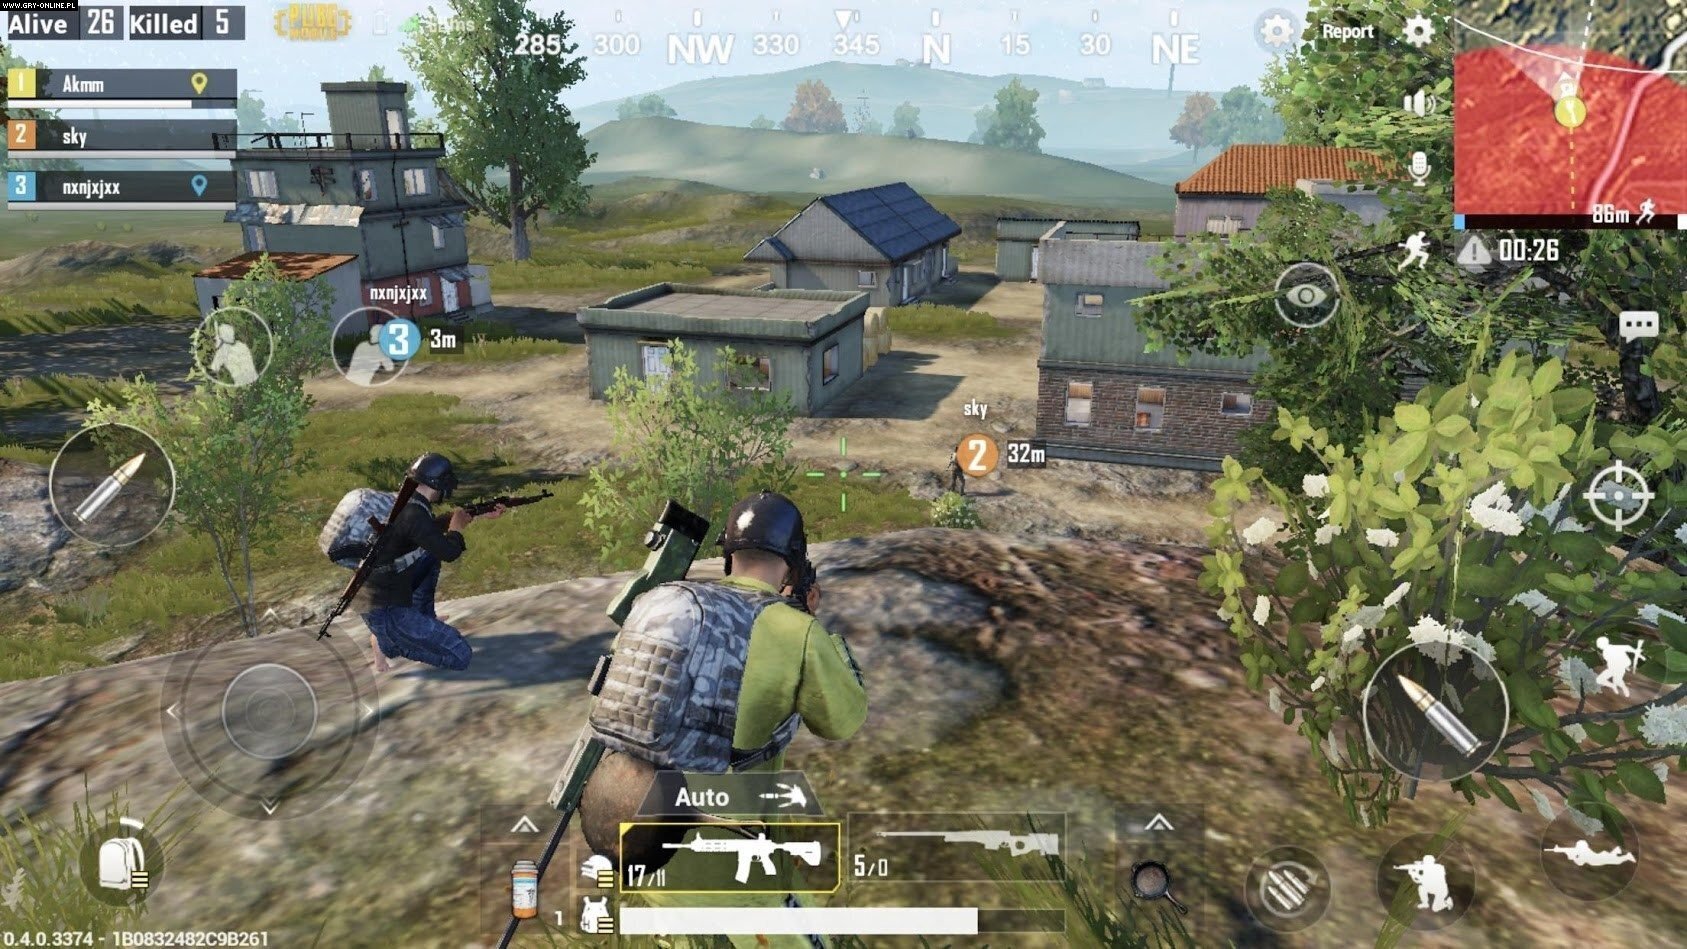 Tencents best ever emulator for pubg фото 71